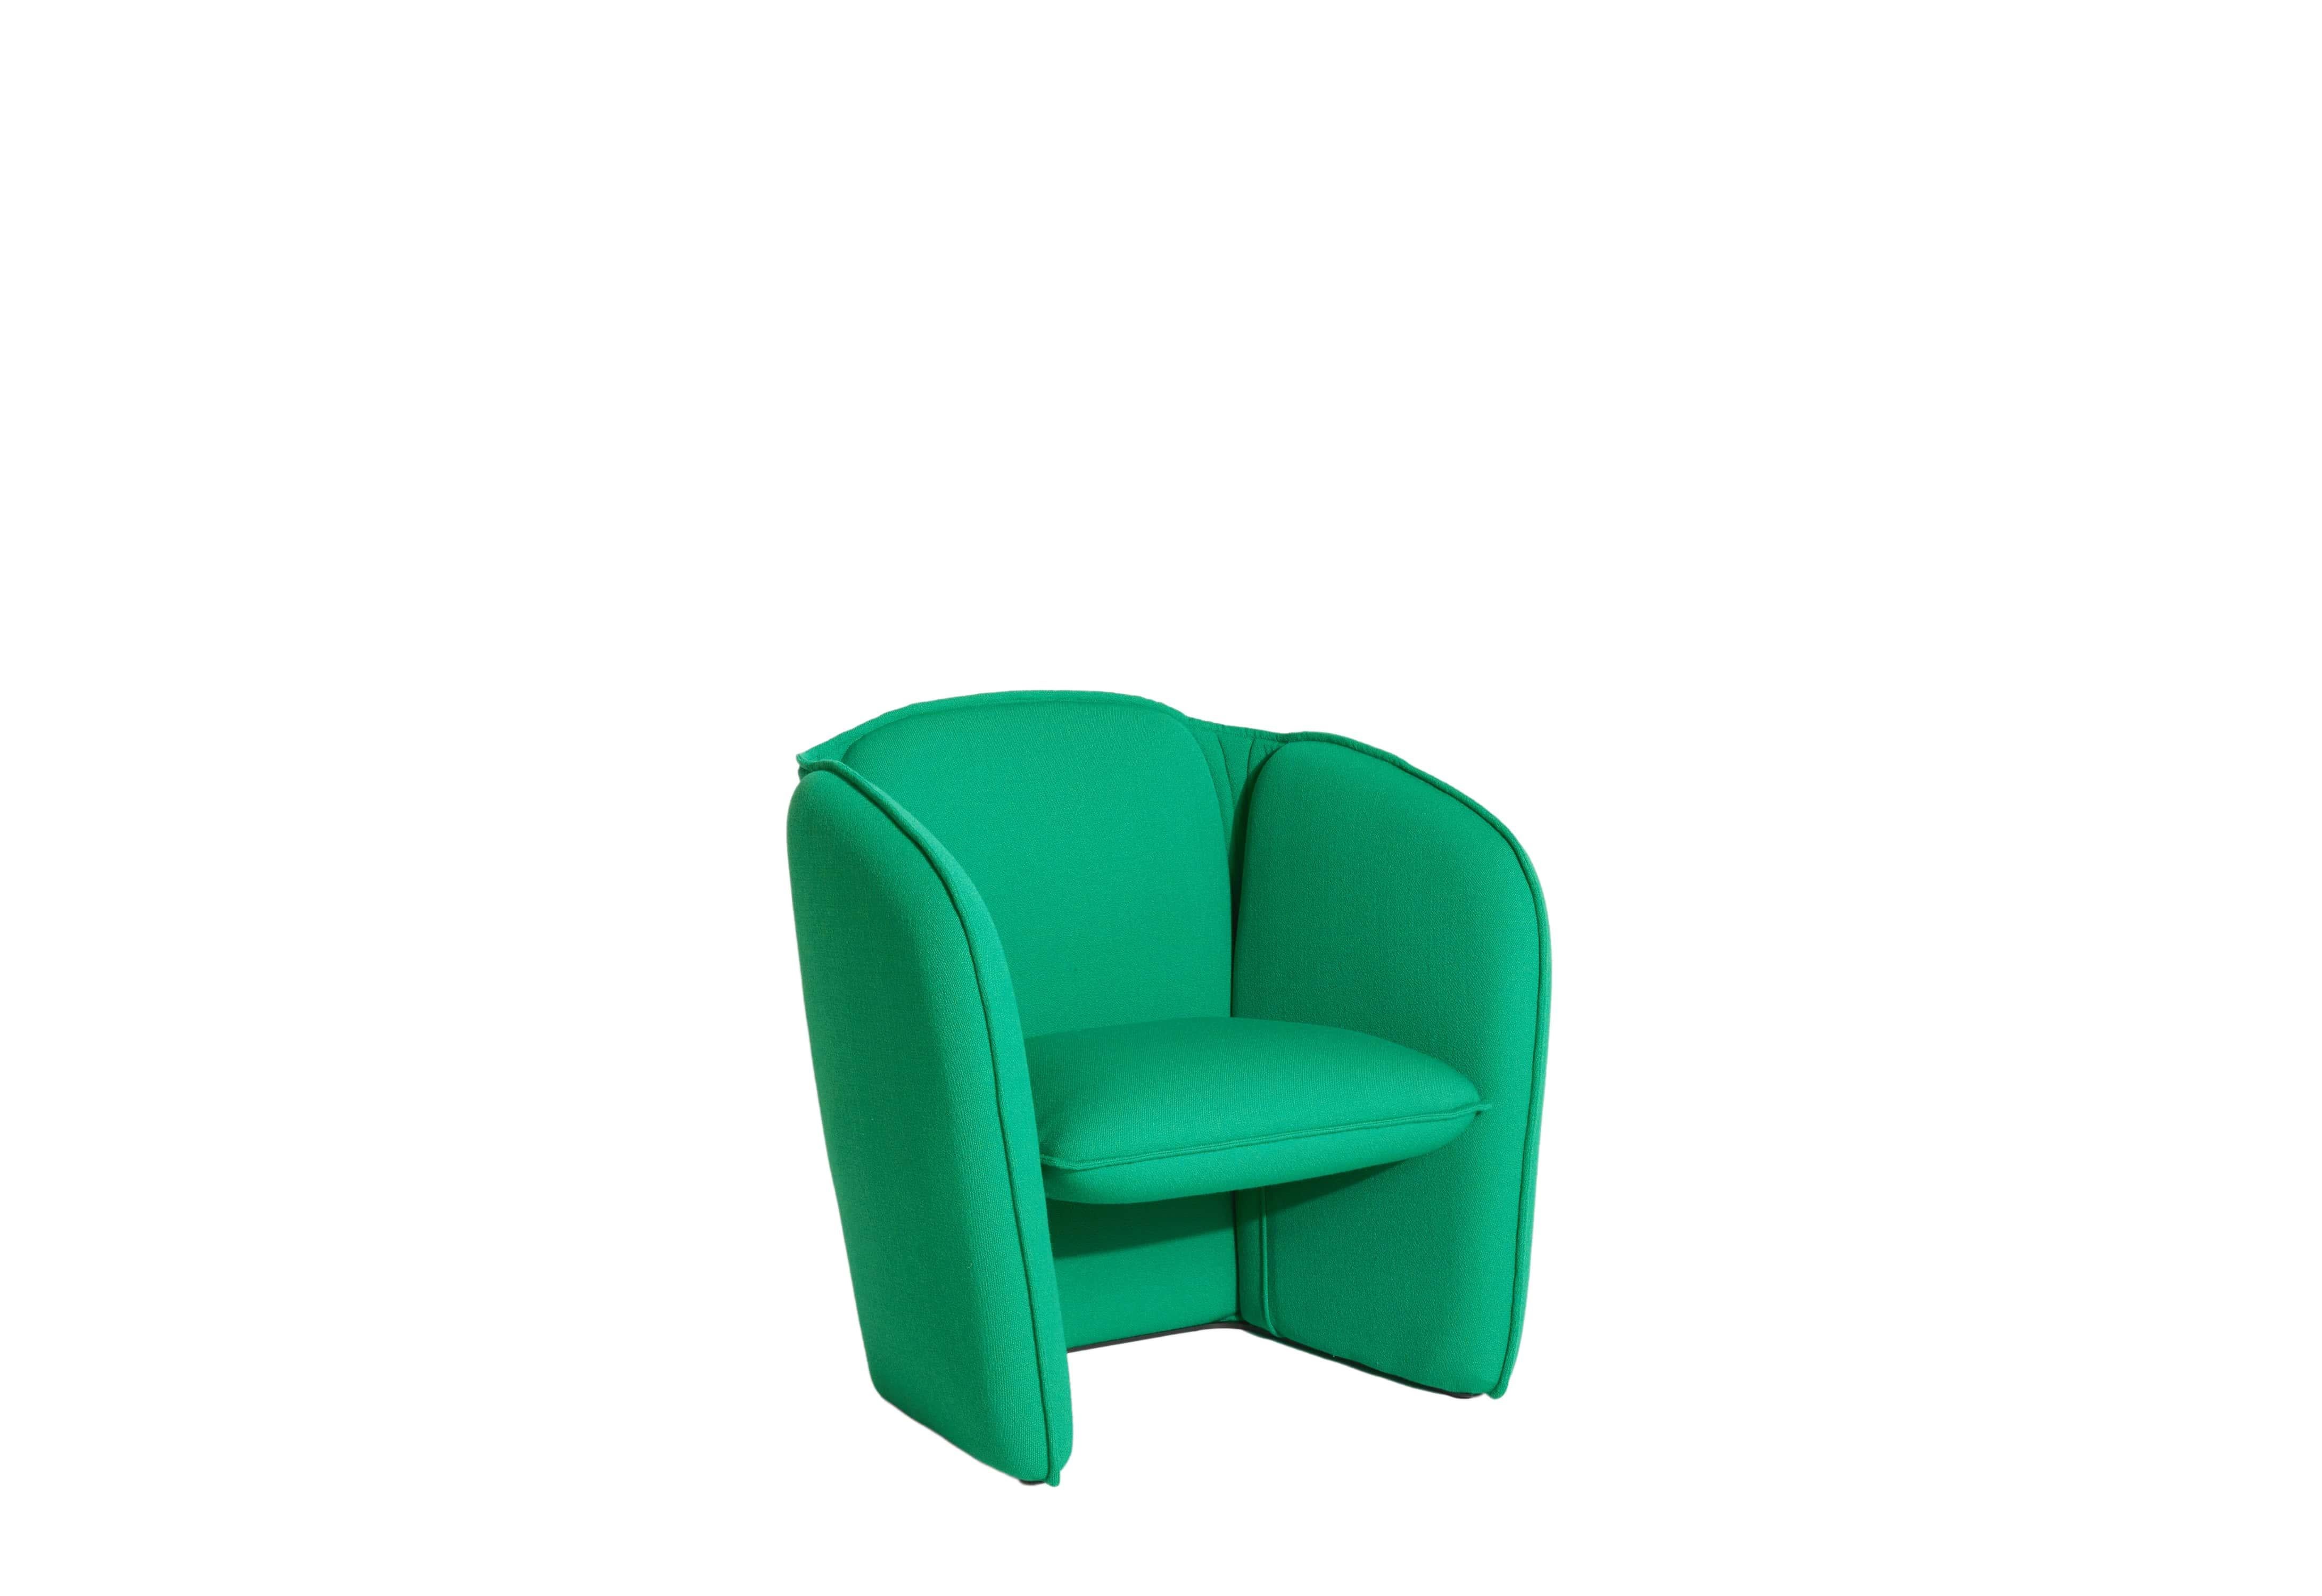 Petite Friture Lily Armchair in Mint Green by Färg & Blanche, 2022

A comprehensive collection comprising a sofa and armchair. With impeccable, concise proportions, and smooth and organic contours for a hospitable feel.

Established in Stockholm